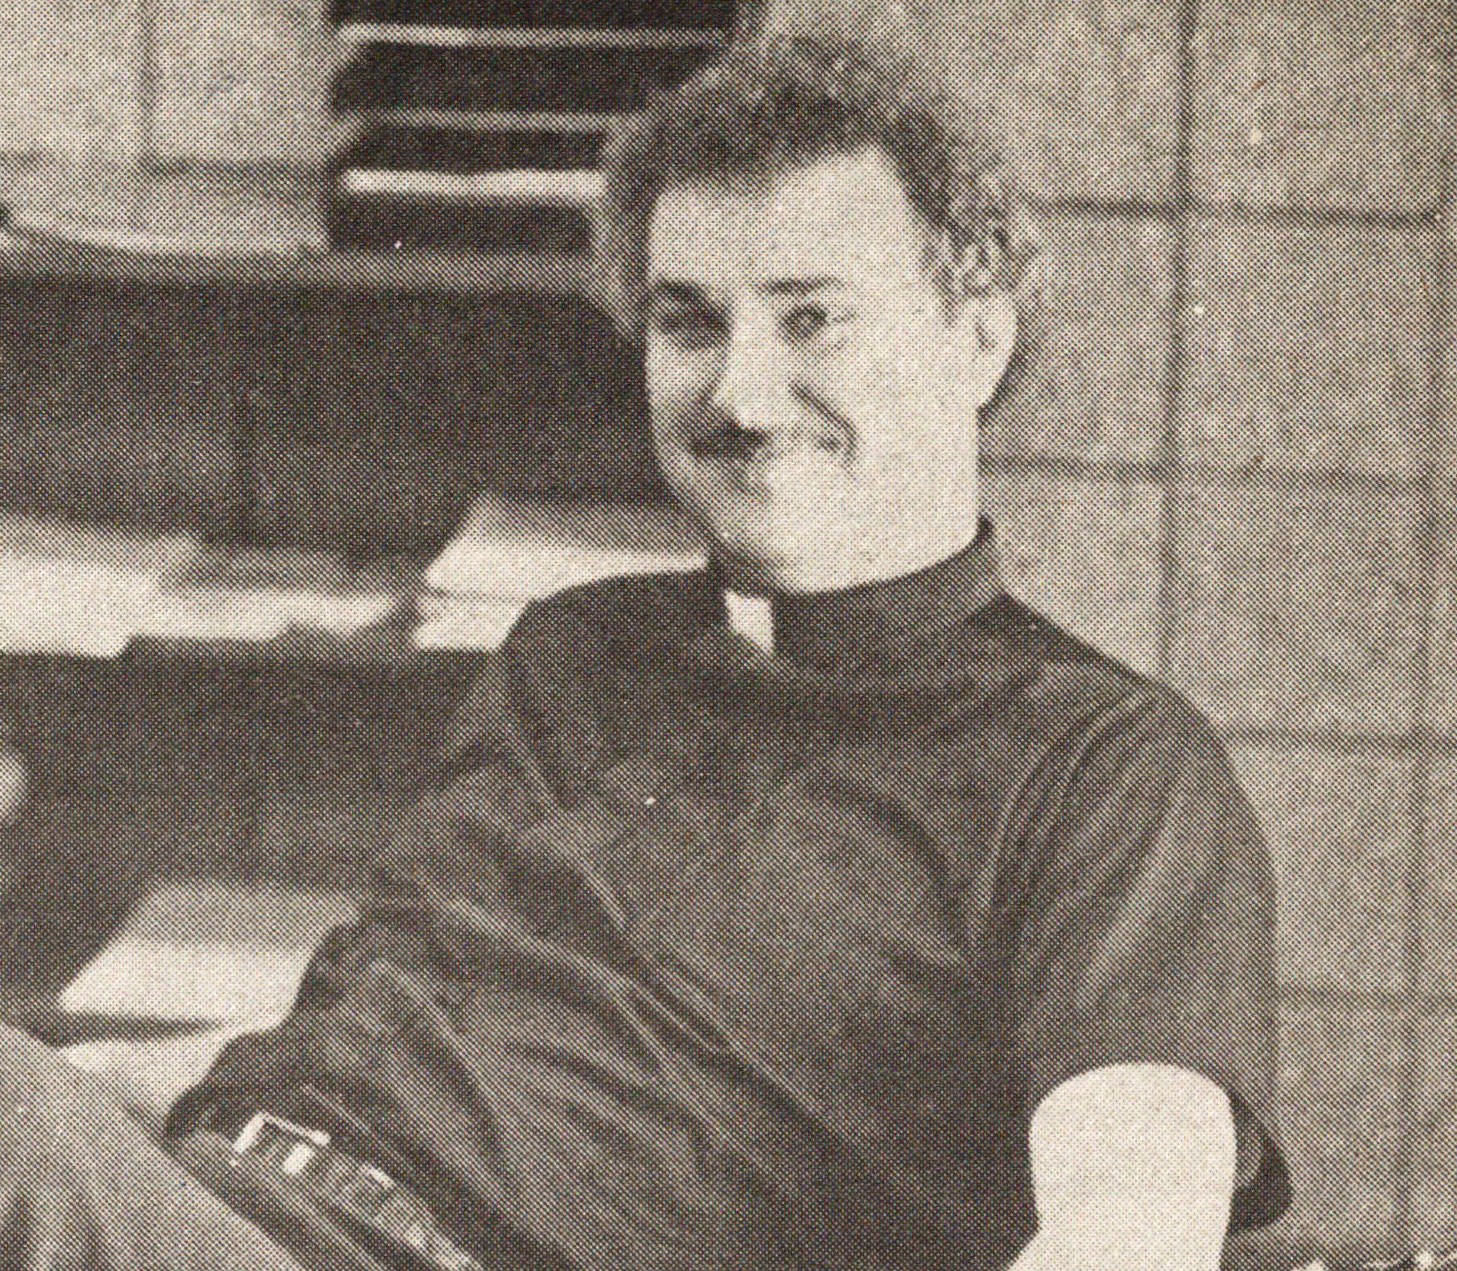  The Rev. Thomas Grace, C.M., in 1980. (Image courtesy of Special Collections and Archives)